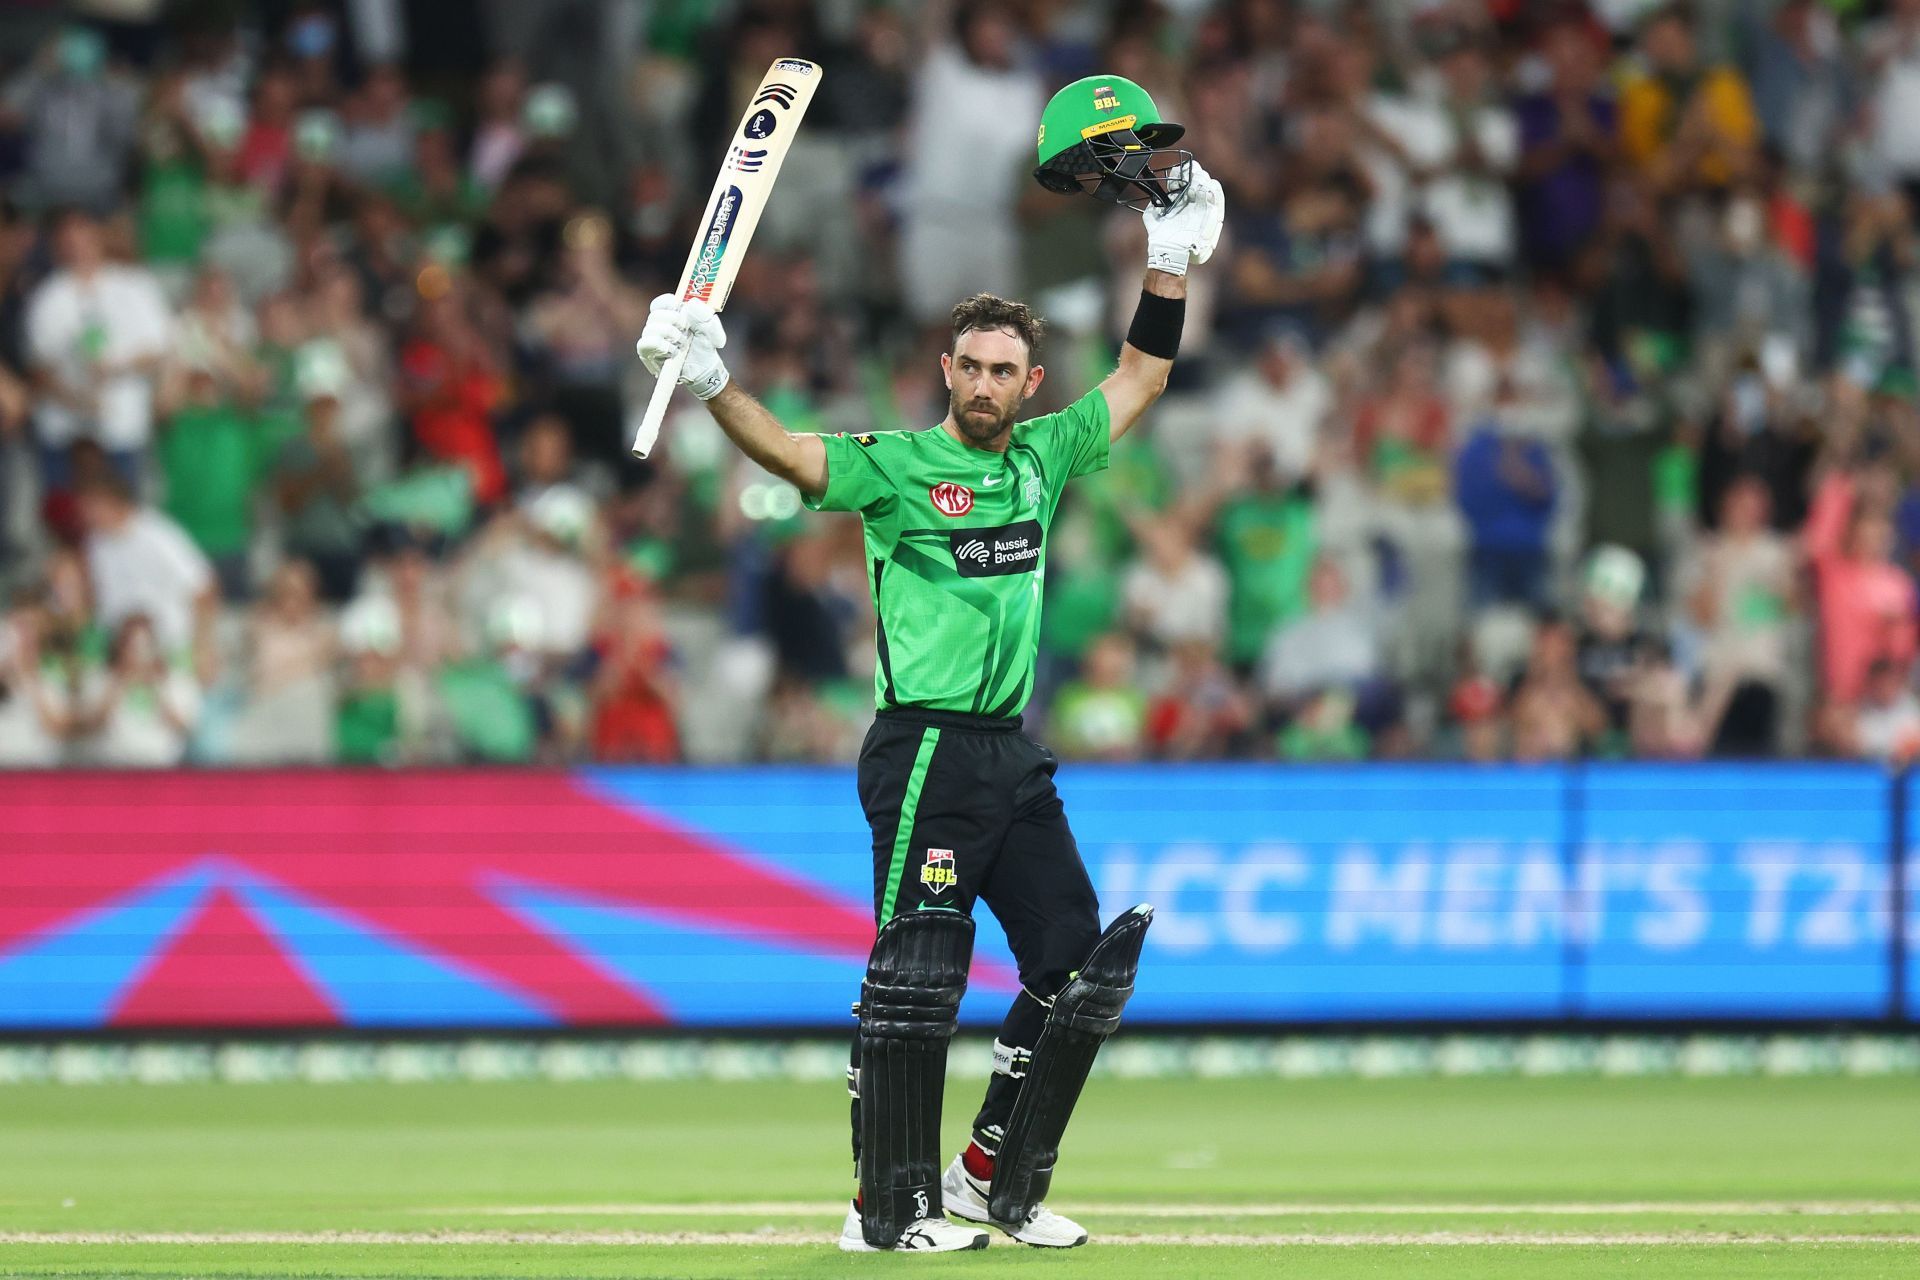 Glenn Maxwell smashed an unbeaten 154* to lead the Melbourne Stars to 273/2.